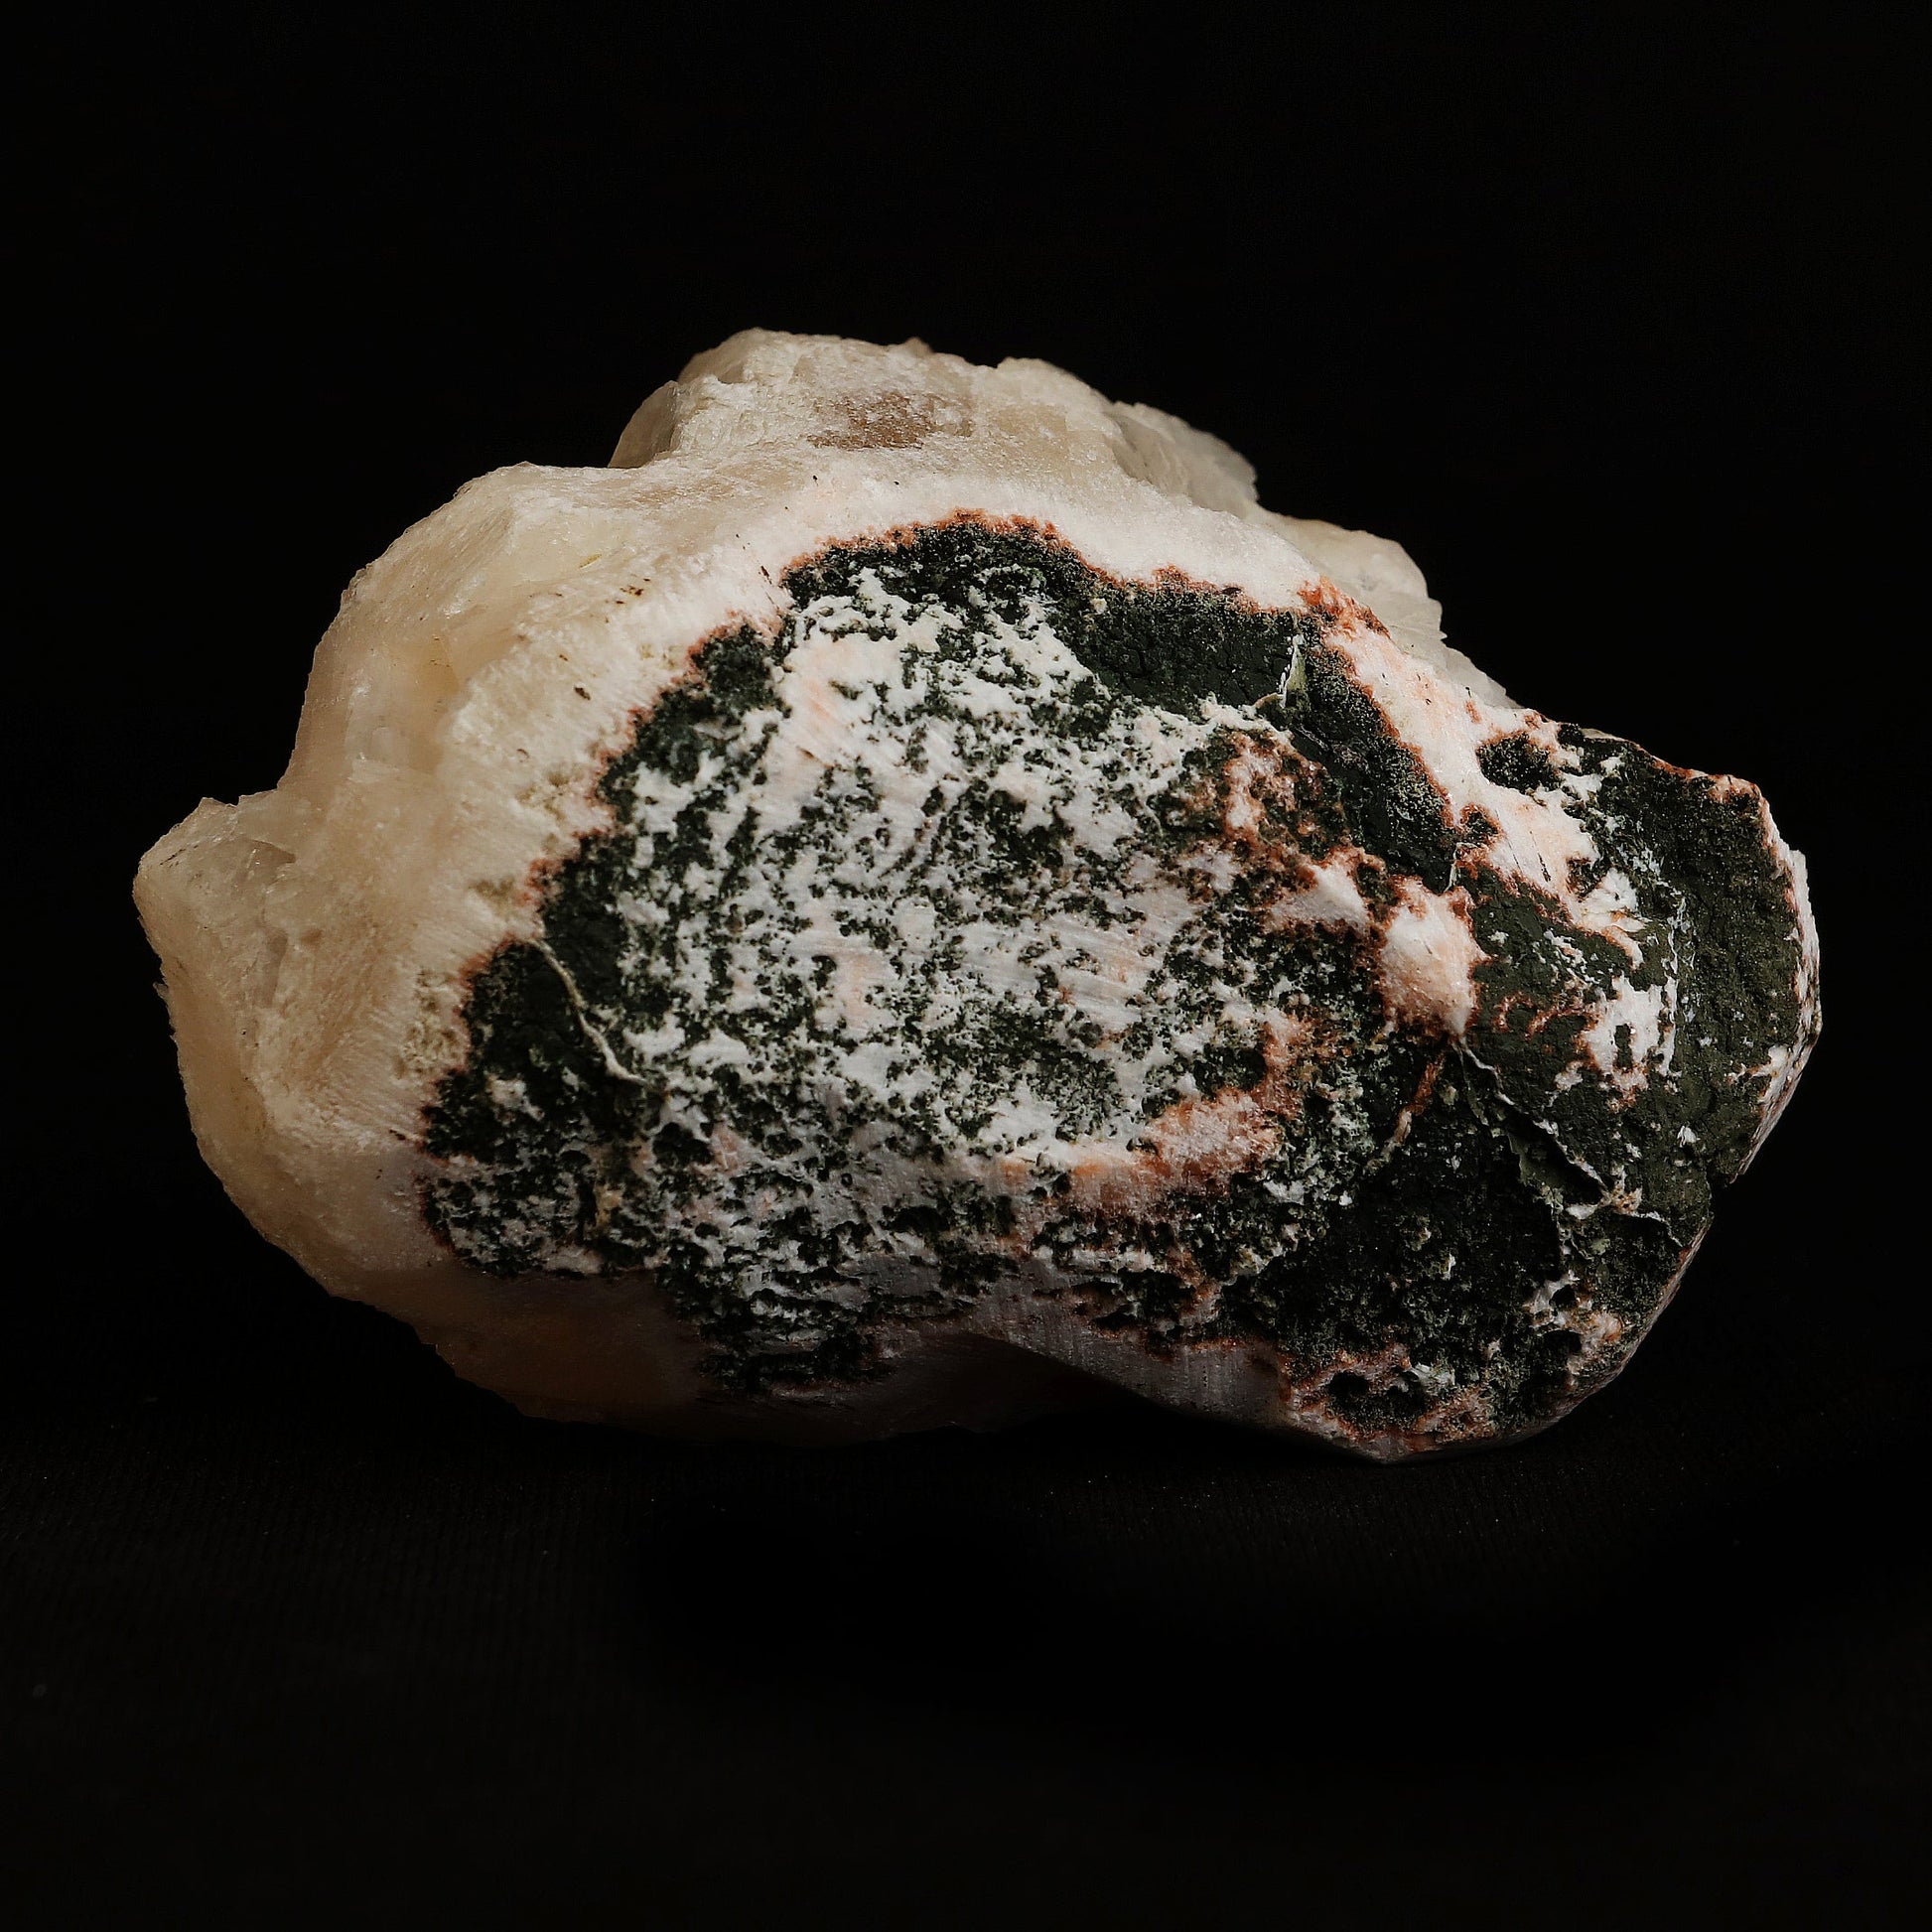 Powellite (Flurocent Mineral) With Stilbite Rare Find Natural Mineral …  https://www.superbminerals.us/products/powellite-flurocent-mineral-with-stilbite-rare-find-natural-mineral-specimen-b-5037  Features:&nbsp;Powellite is one of the rarest and most valuable minerals found in India's famous Deccan Trap basalts. This pair of beautiful yellow-orange crystals is nestled between and on top of exceedingly shiny and iridescent white Stilbite blades.Powellites feature a dazzling, golden fluorescence,